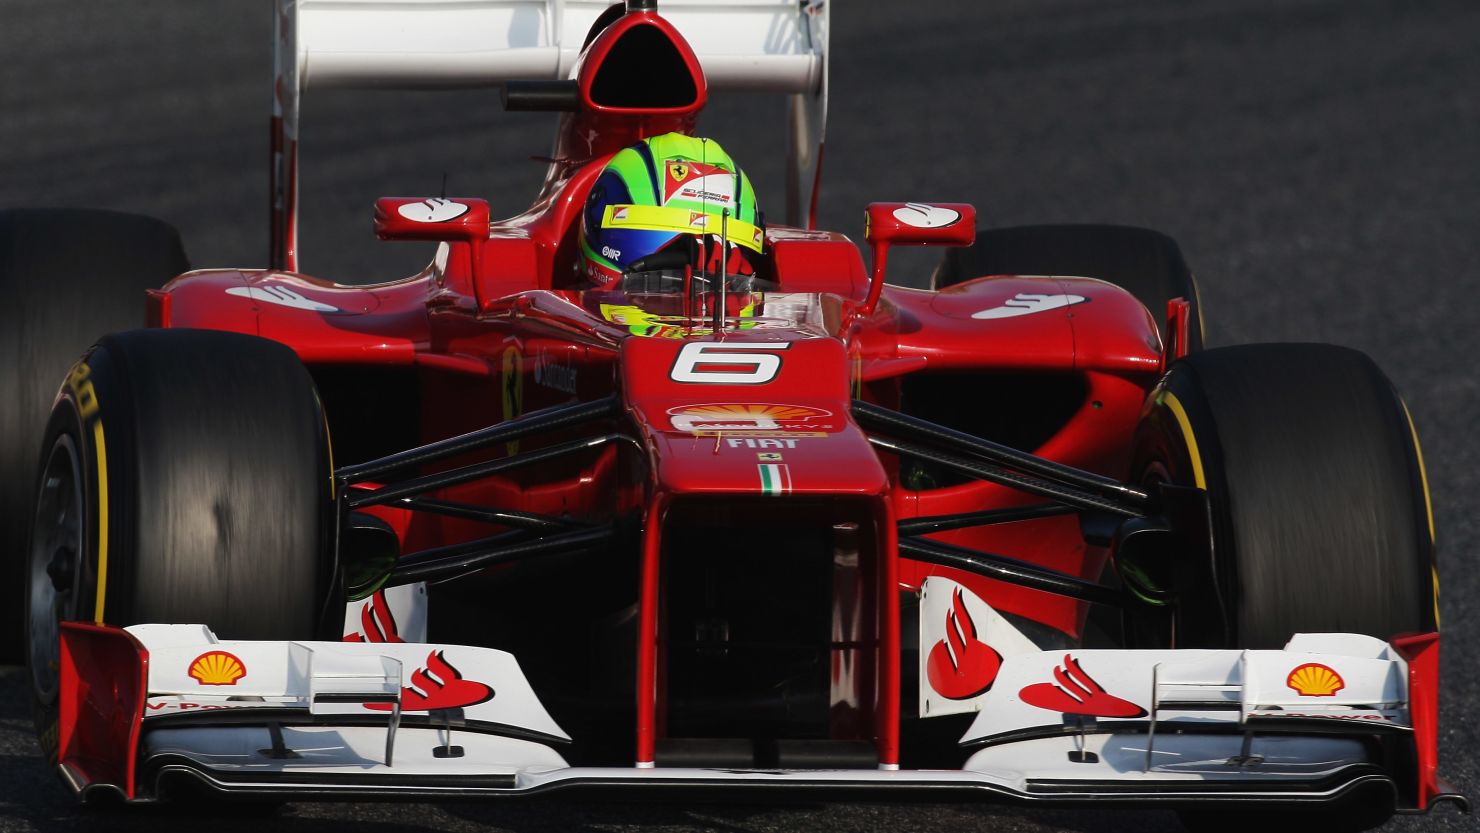 Ferrari's new F2012, like many new cars for the forthcoming season, features a dramatic steep-nosed design.